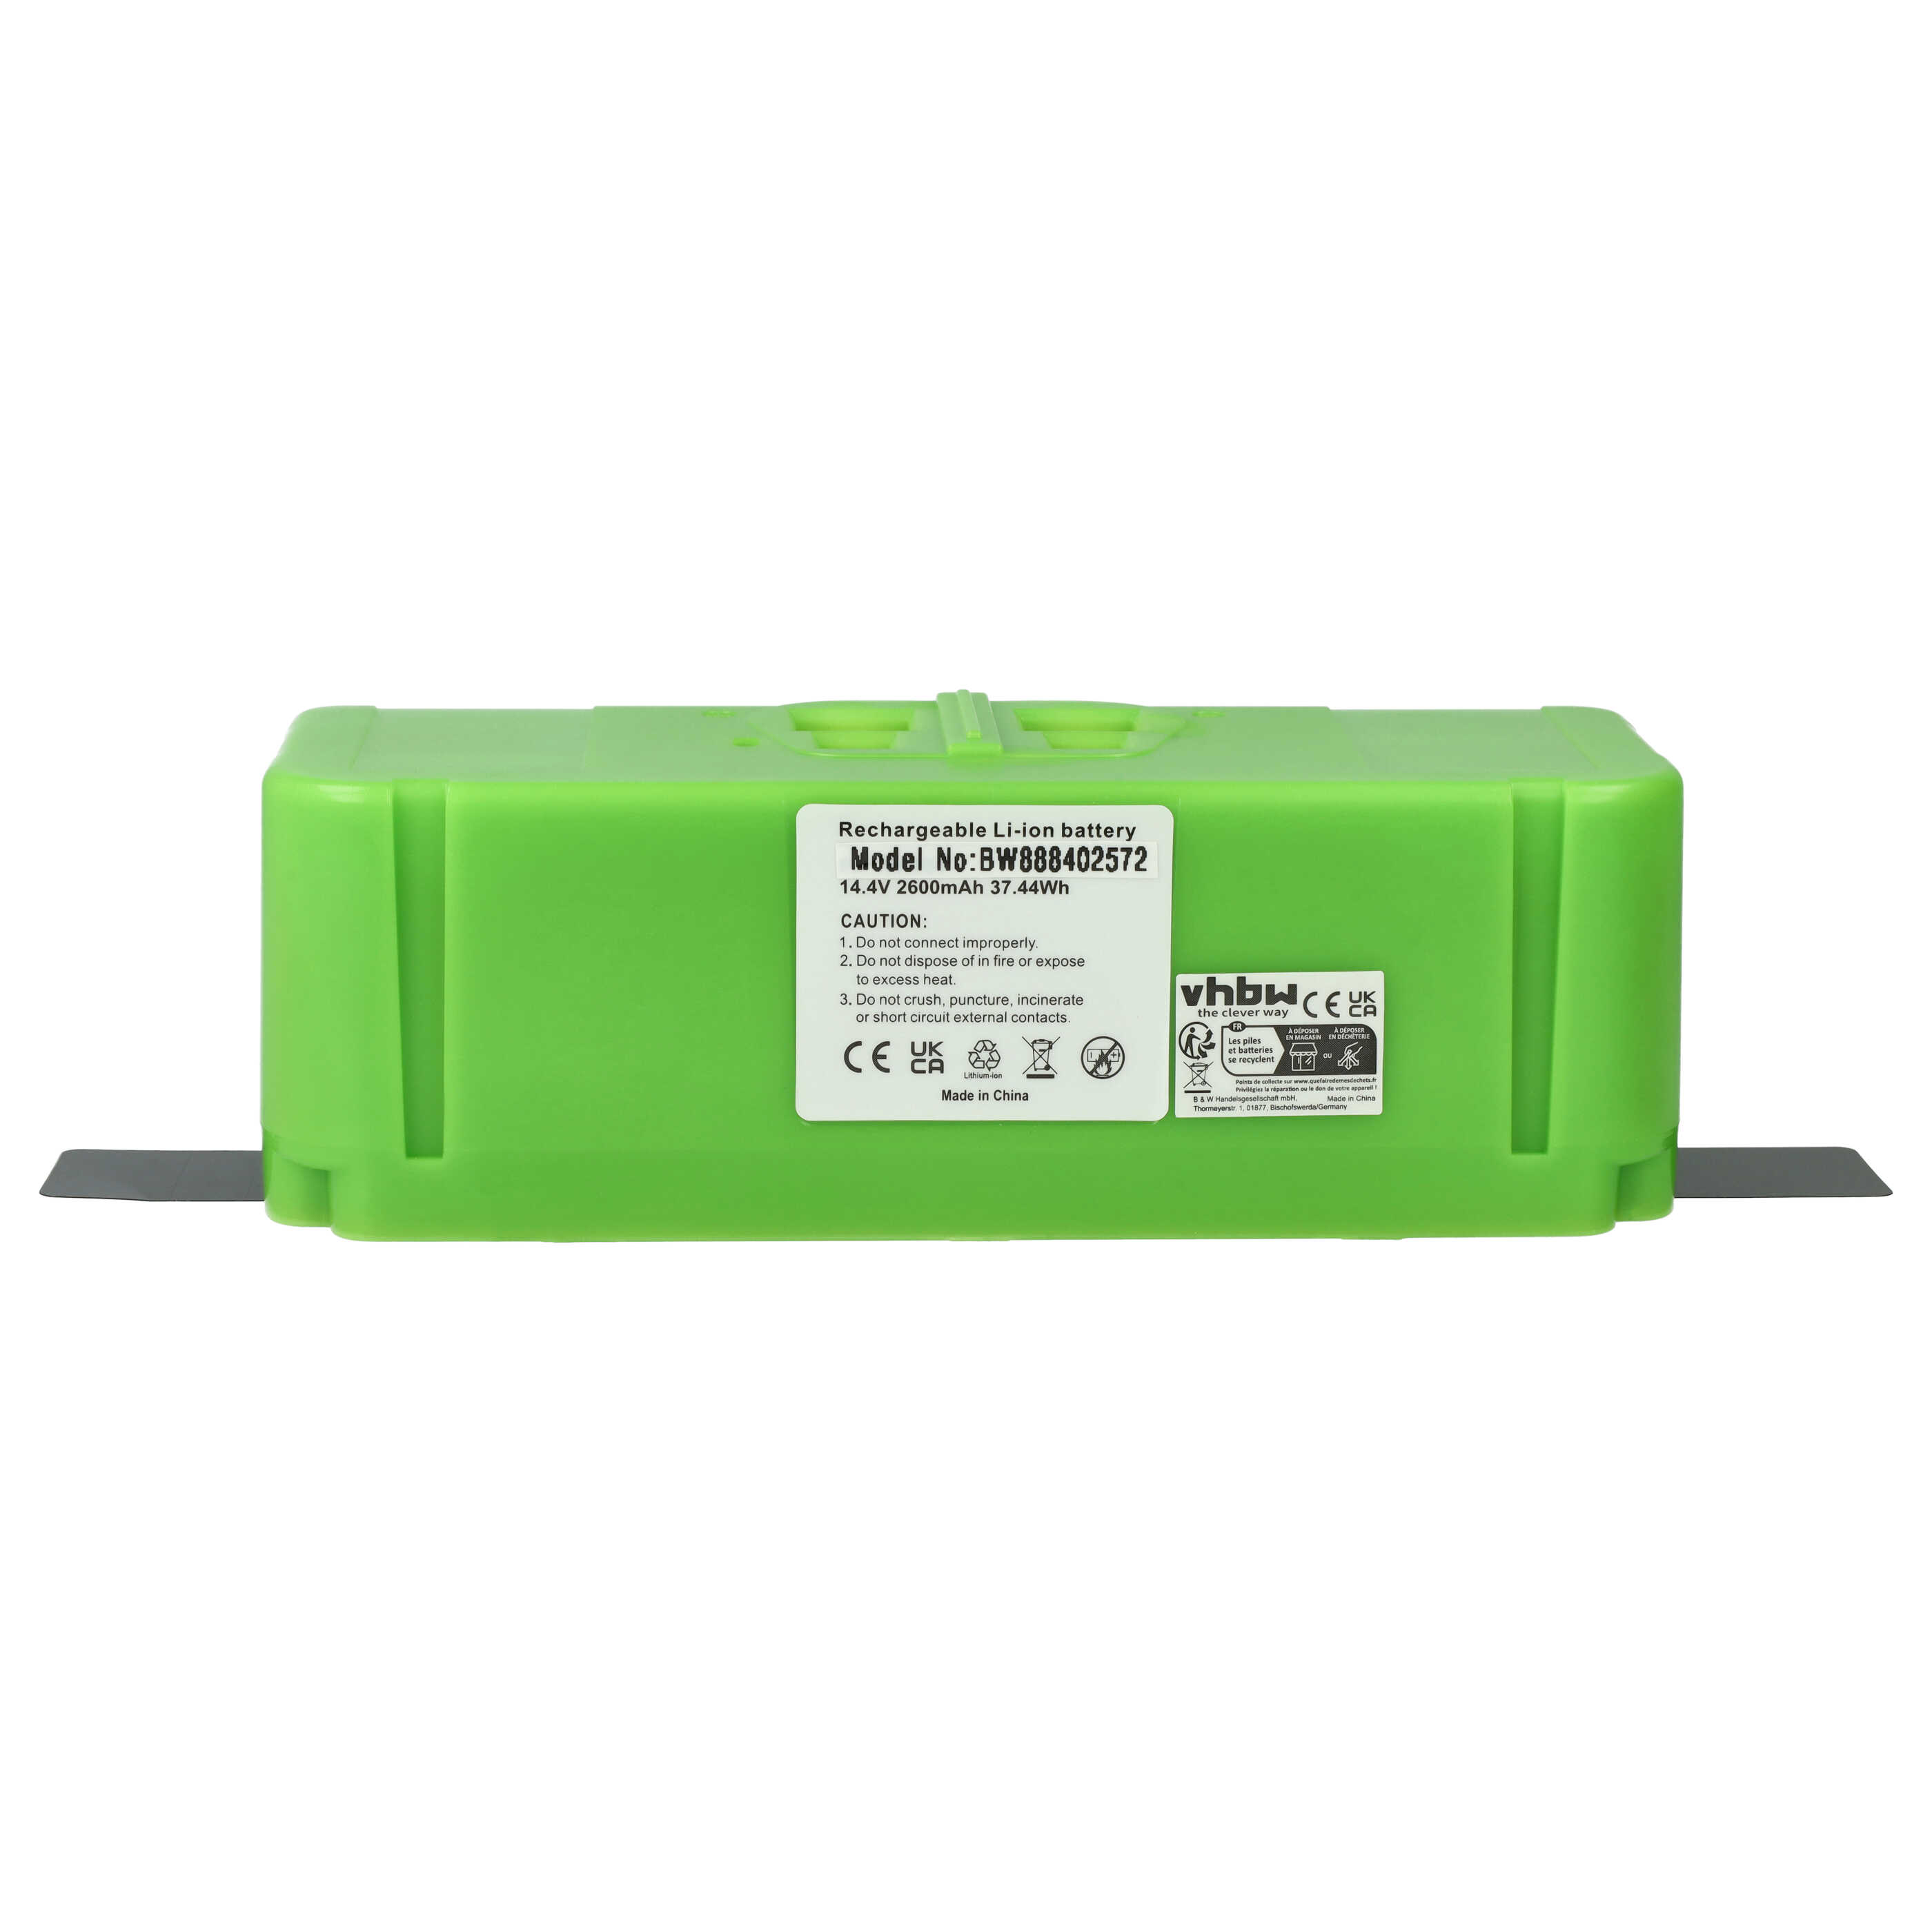 Battery Replacement for iRobot 379640, 379639, 616398, 379641, 379638, 379642 for - 2600mAh, 14.4V, Li-Ion